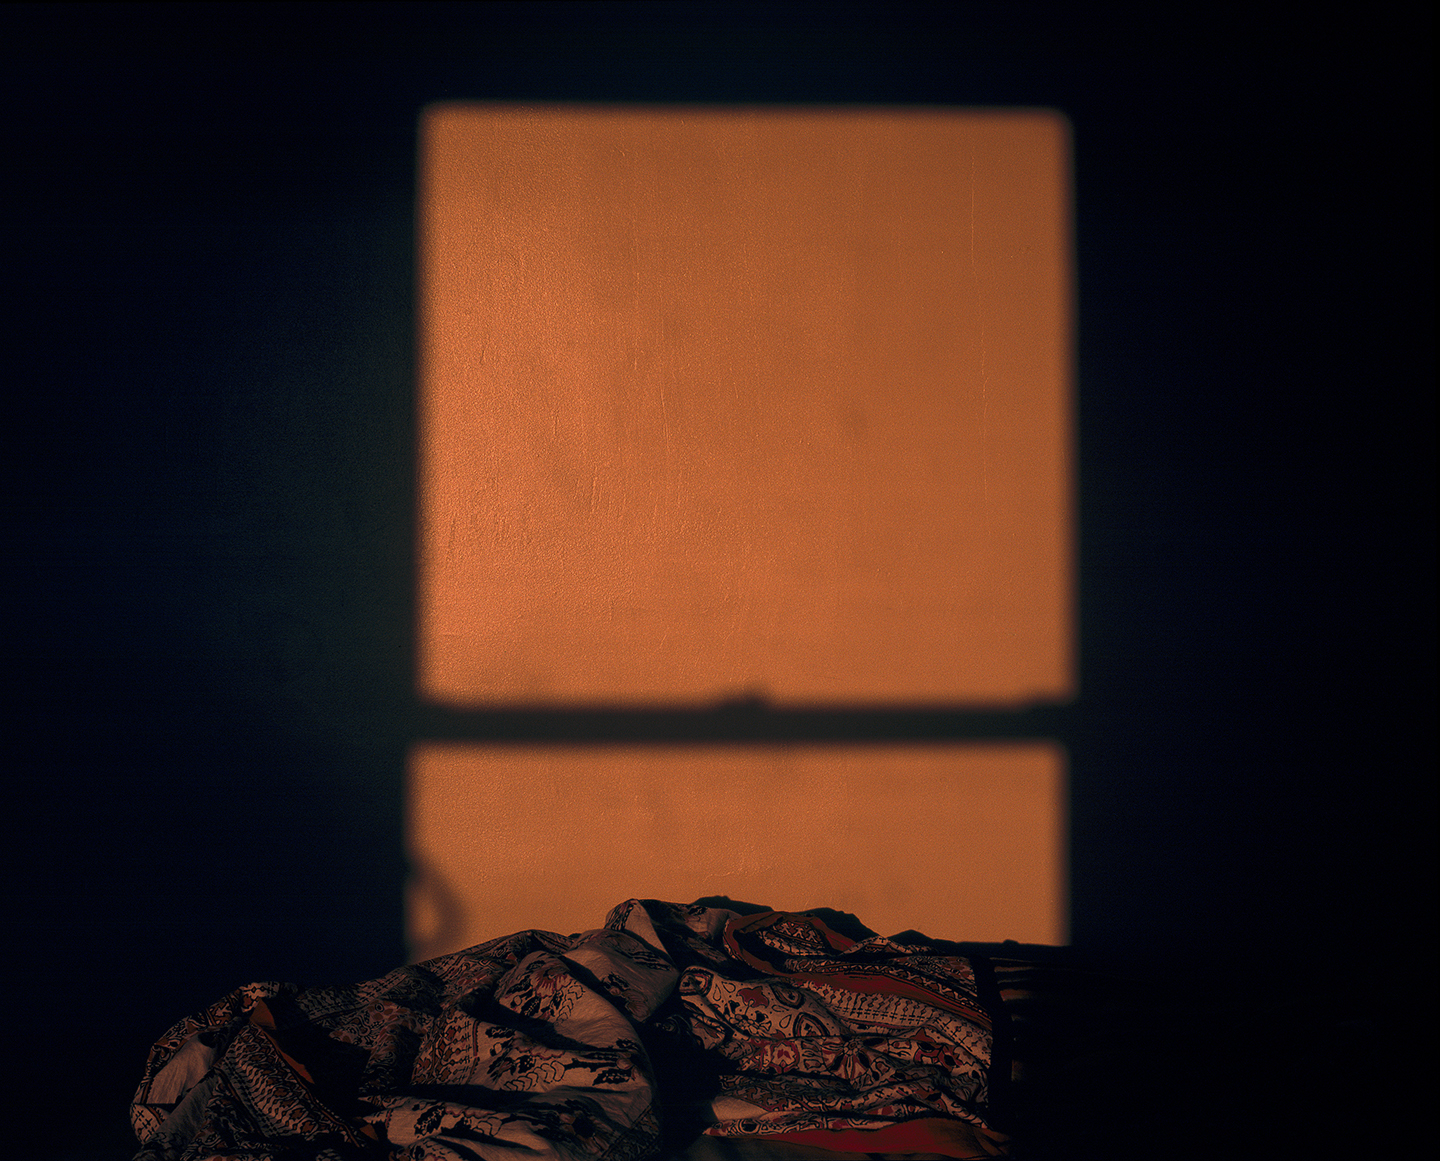 Orange Light Reflected on Wall from Window over a Bed